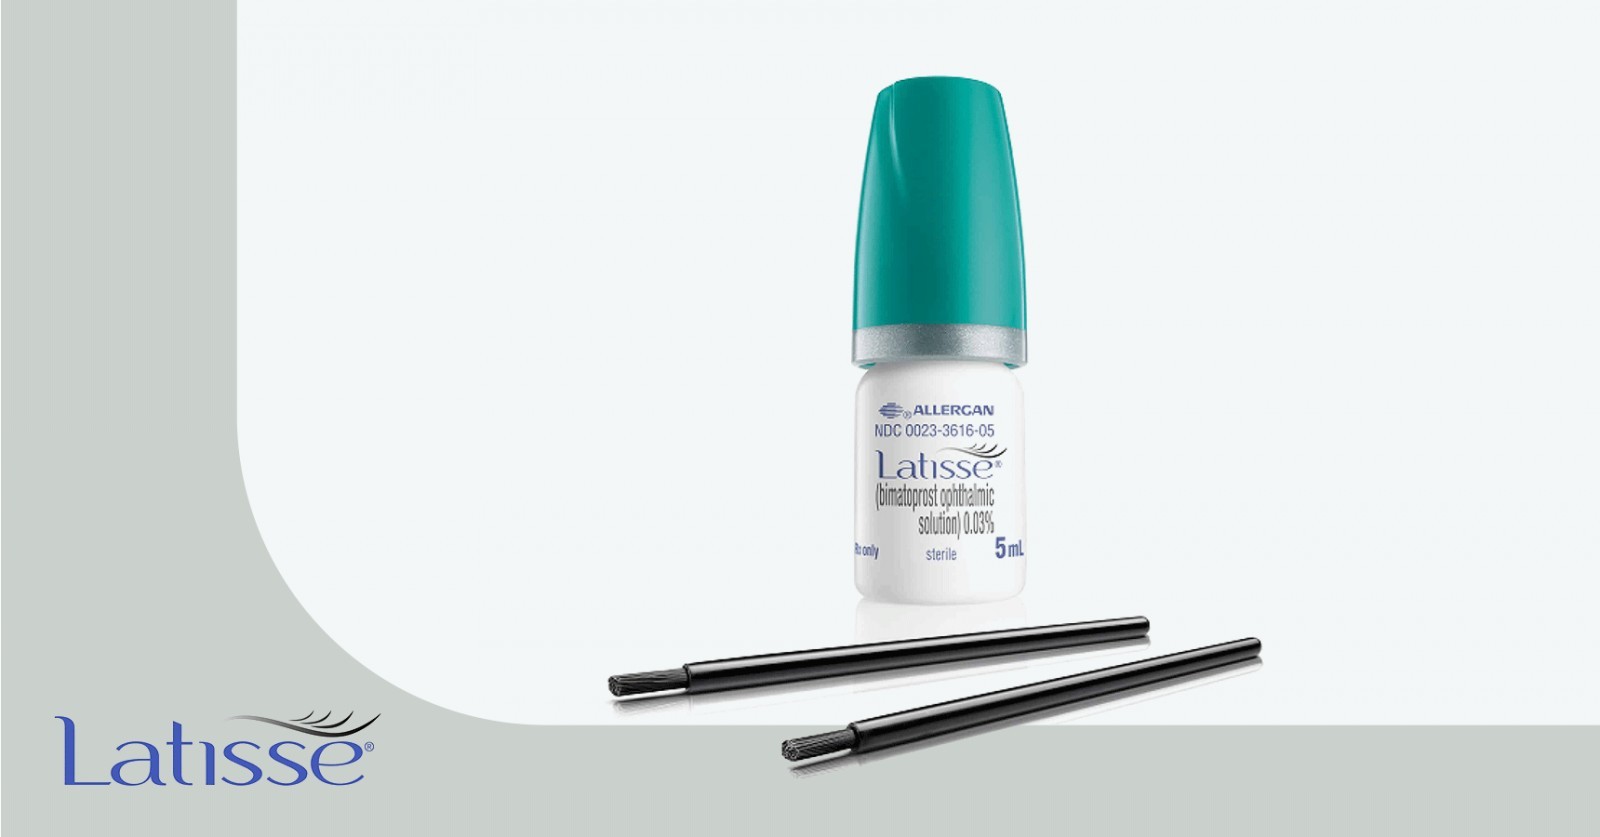 LATISSE® the first prescription treatment designed to grow longer and fuller eyelashes.